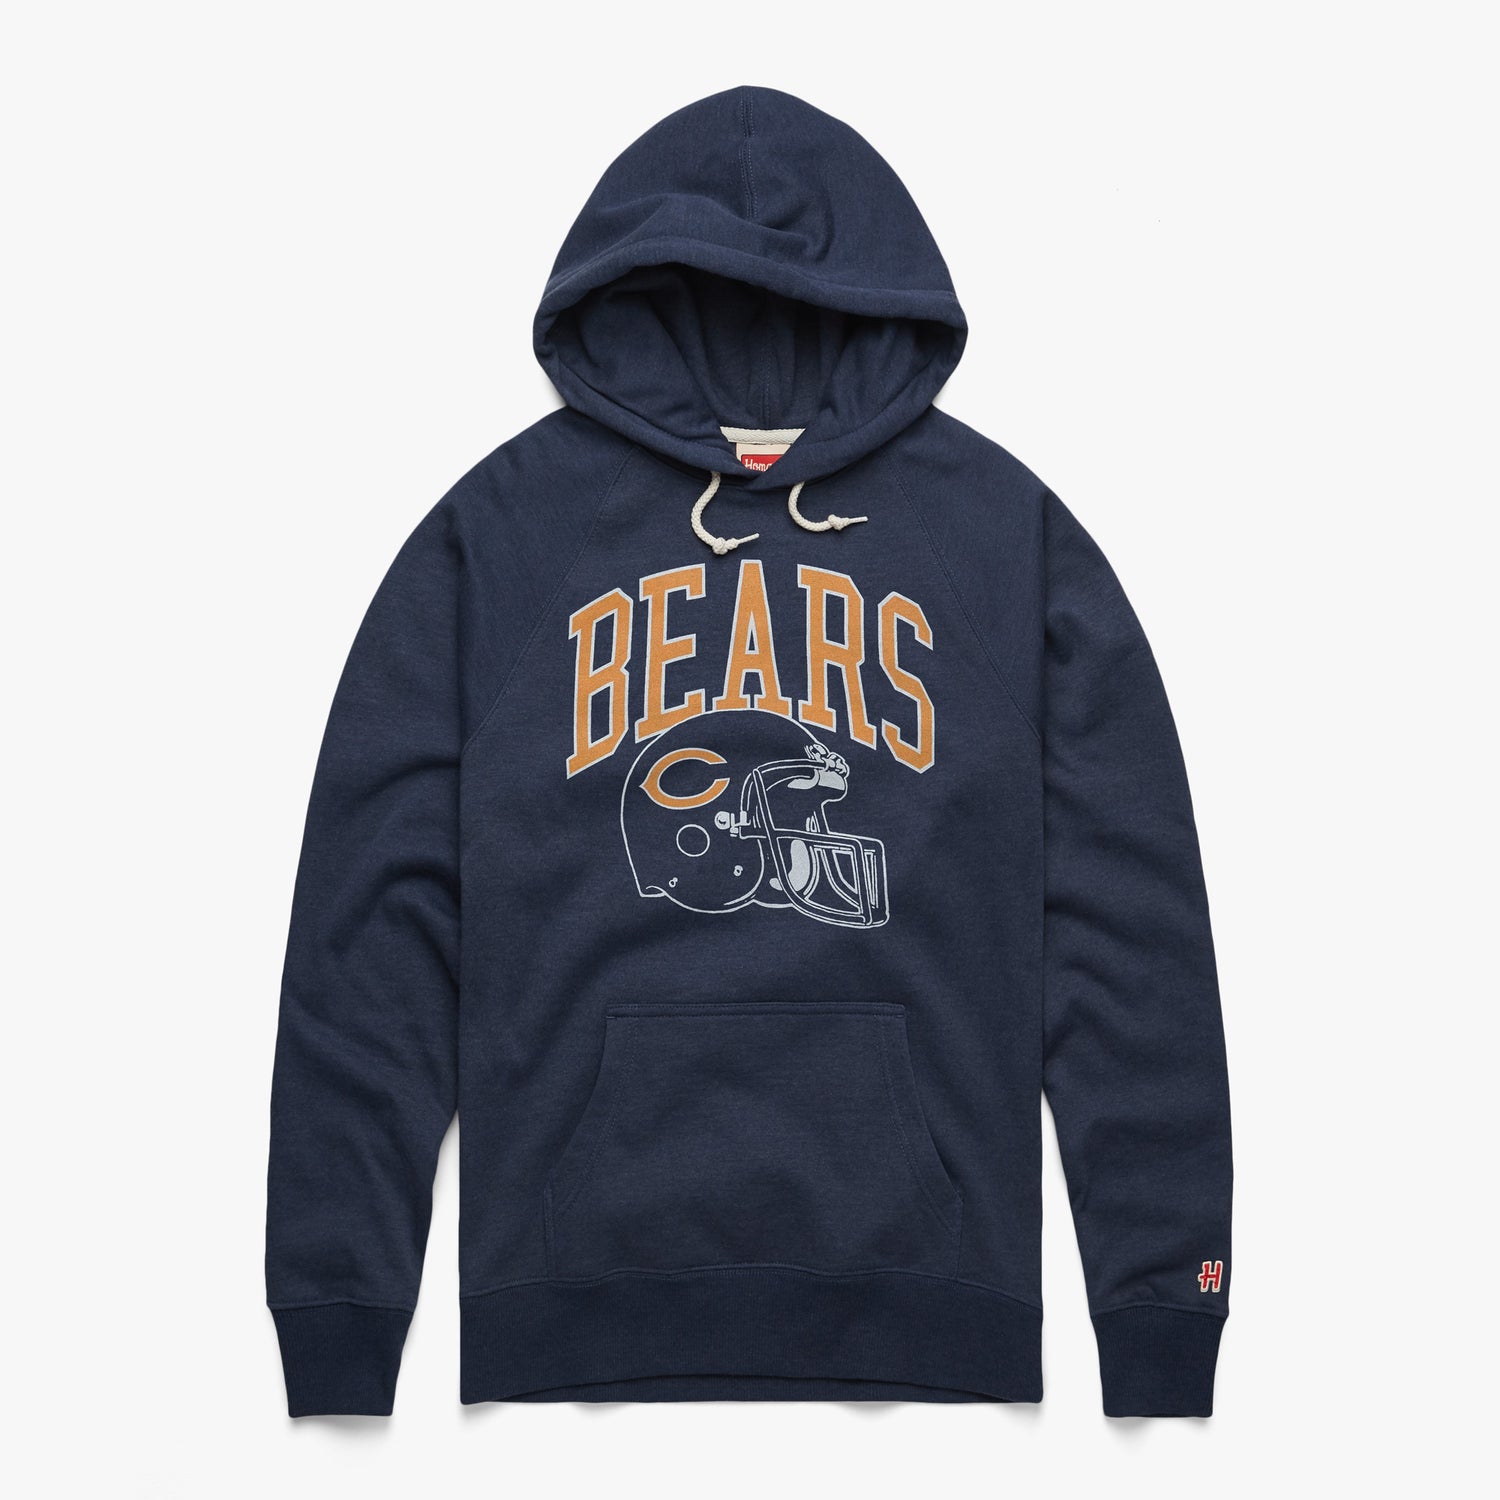 Chicago Bears Helmet Retro Hoodie from Homage. | Officially Licensed Vintage NFL Apparel from Homage Pro Shop.